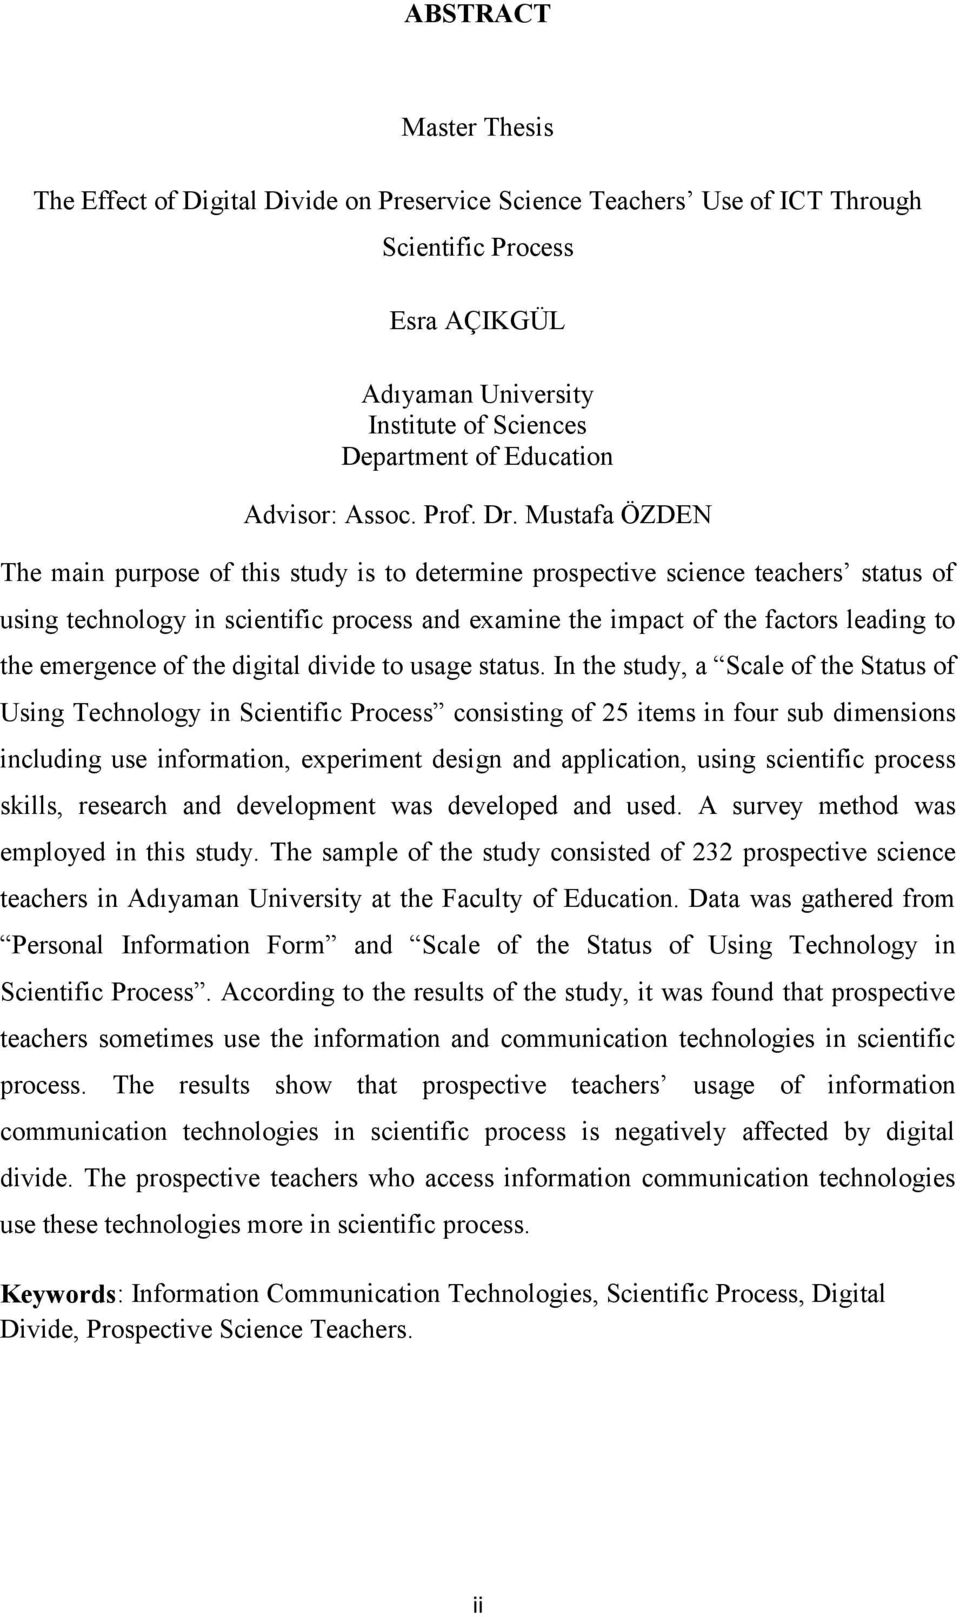 Mustafa ÖZDEN The main purpose of this study is to determine prospective science teachers status of using technology in scientific process and examine the impact of the factors leading to the